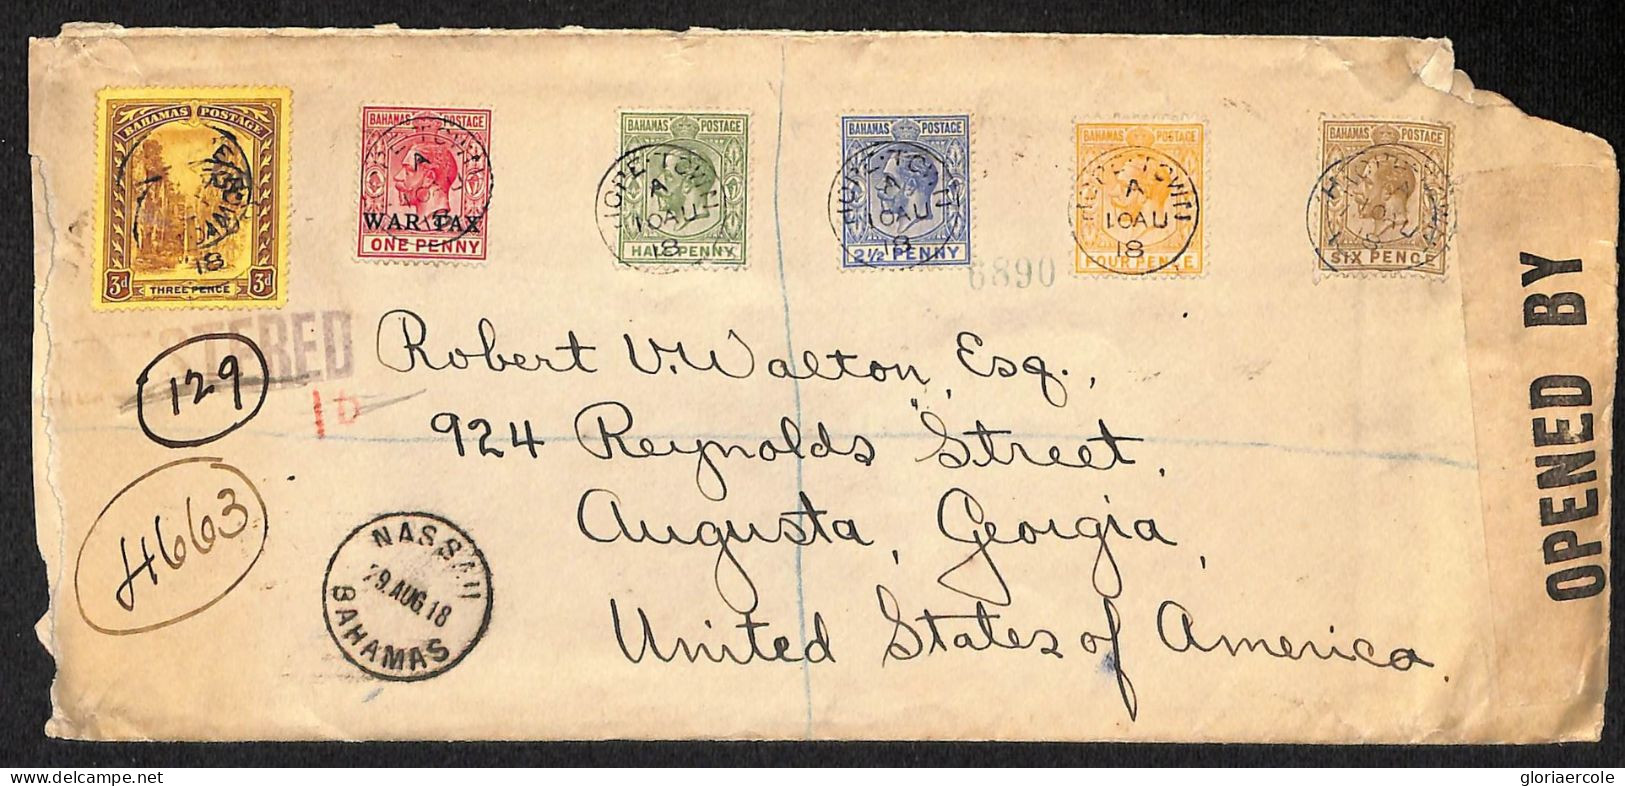 25239 - BAHAMAS - Postal History - REGISTERED COVER To The USA -  CENSORED! 1918 - 1859-1963 Crown Colony